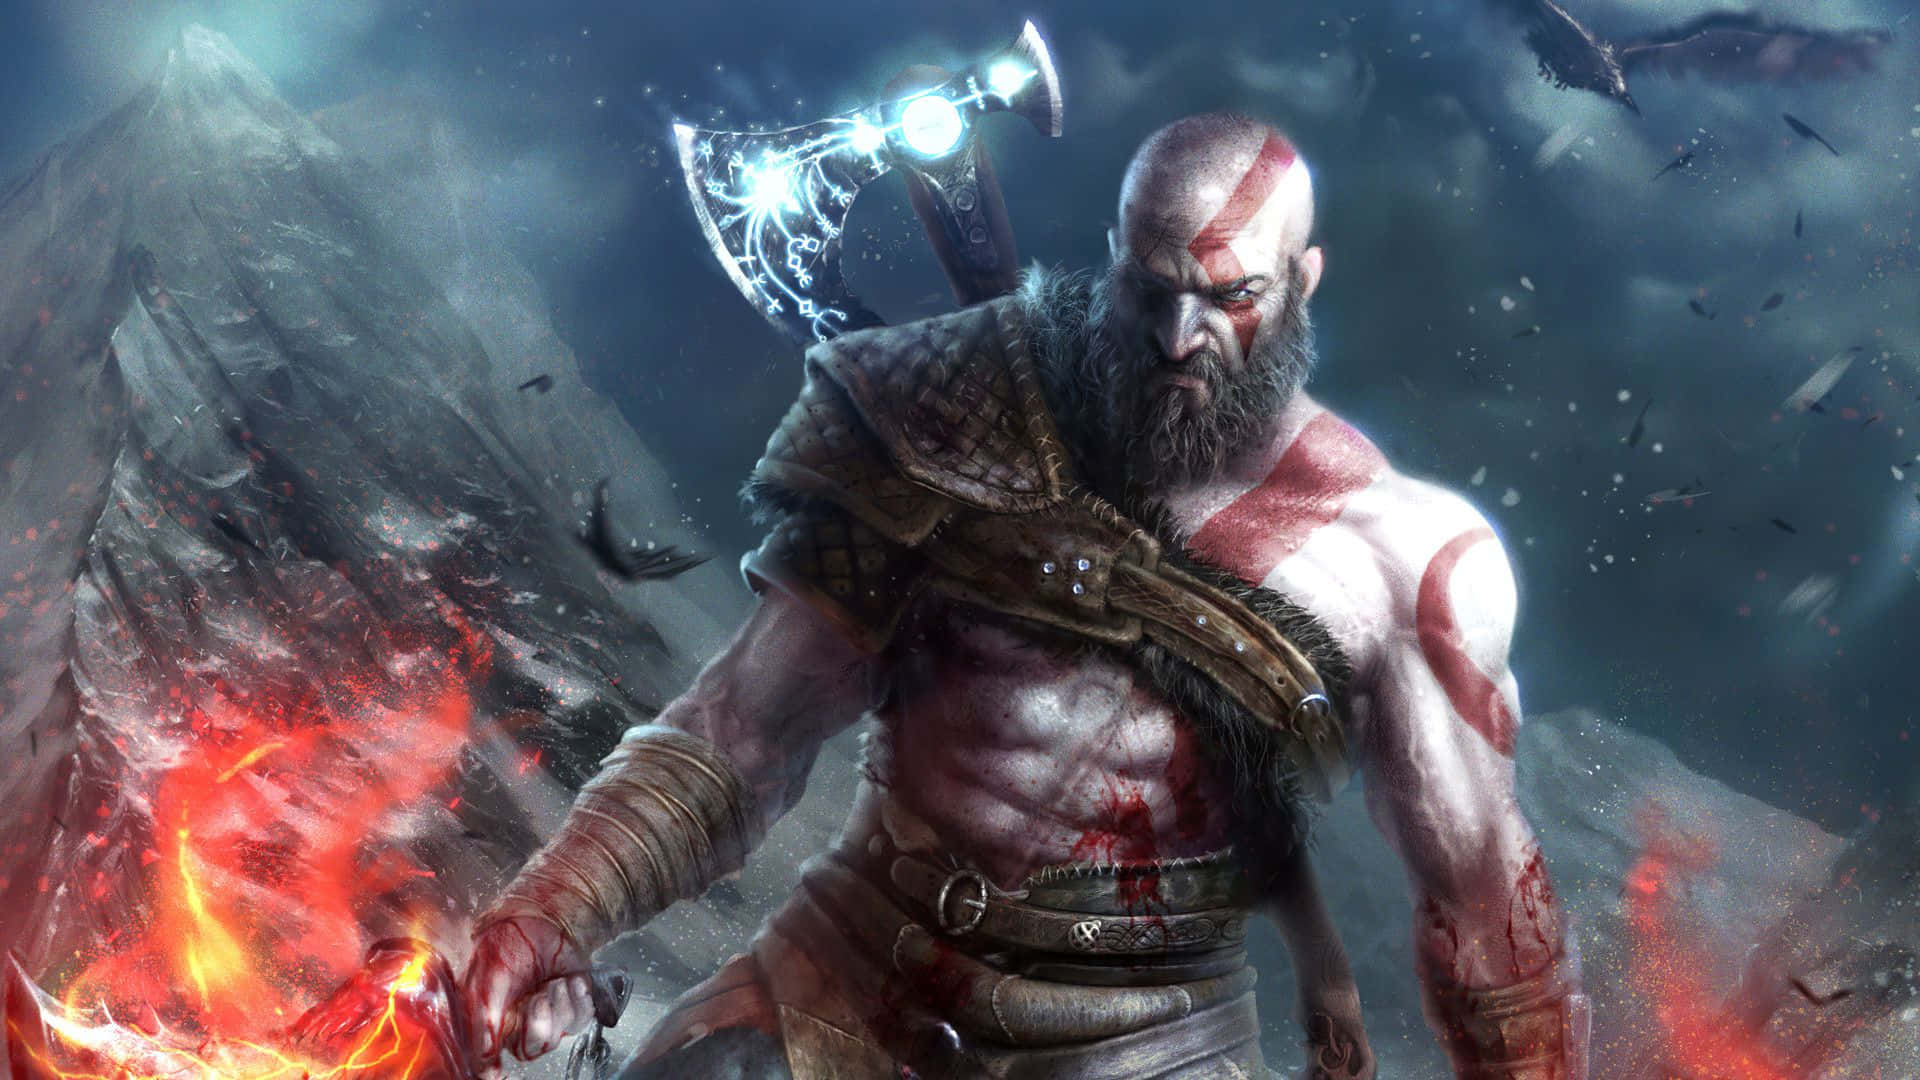 Kratos and Atreus in an epic battle in God of War